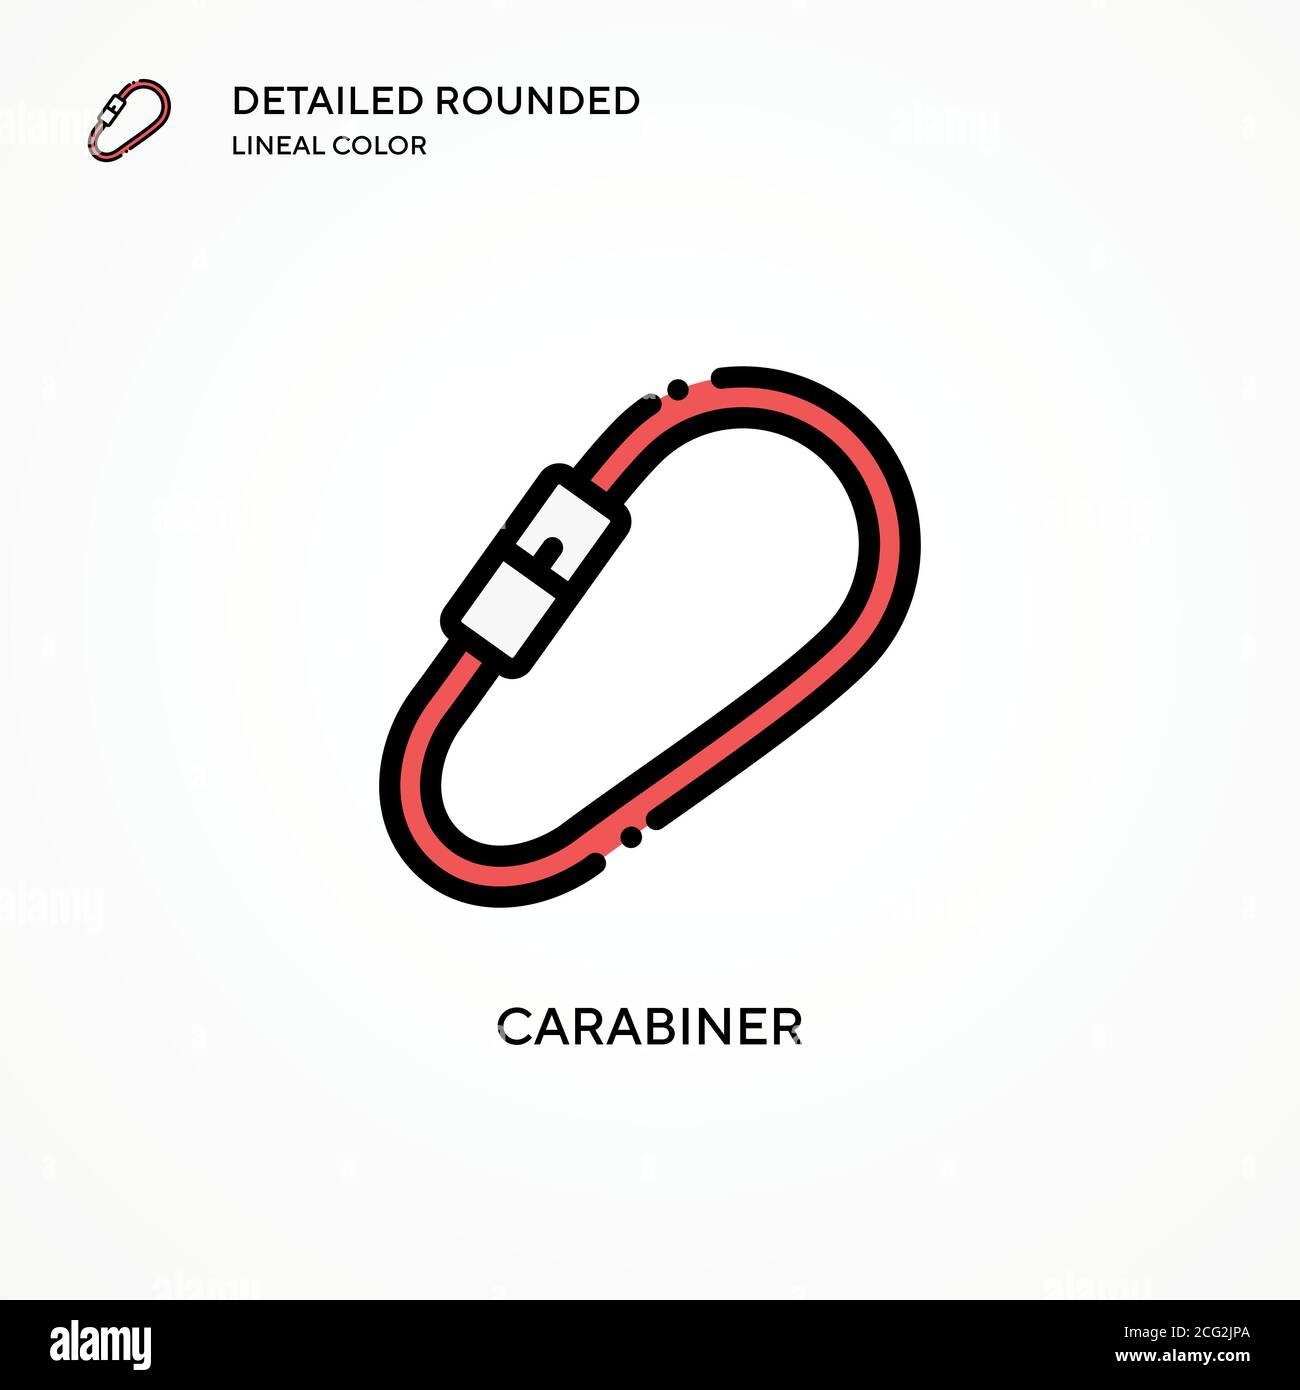 Carabiner vector icon. Modern vector illustration concepts. Easy to edit and customize. Stock Vector